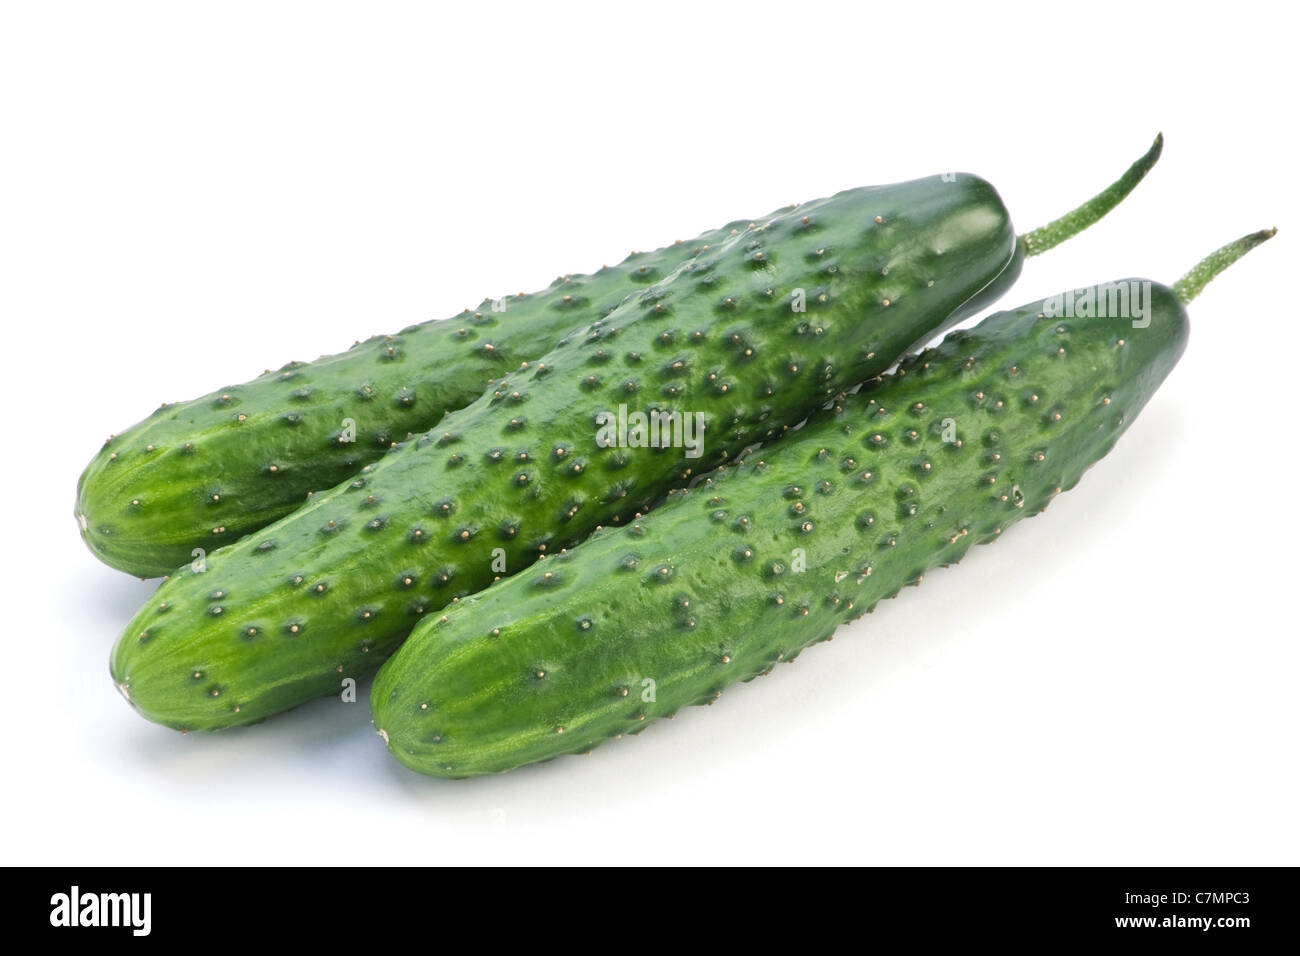 Green long cucumber fresh vegetable isolated on white Stock Photo